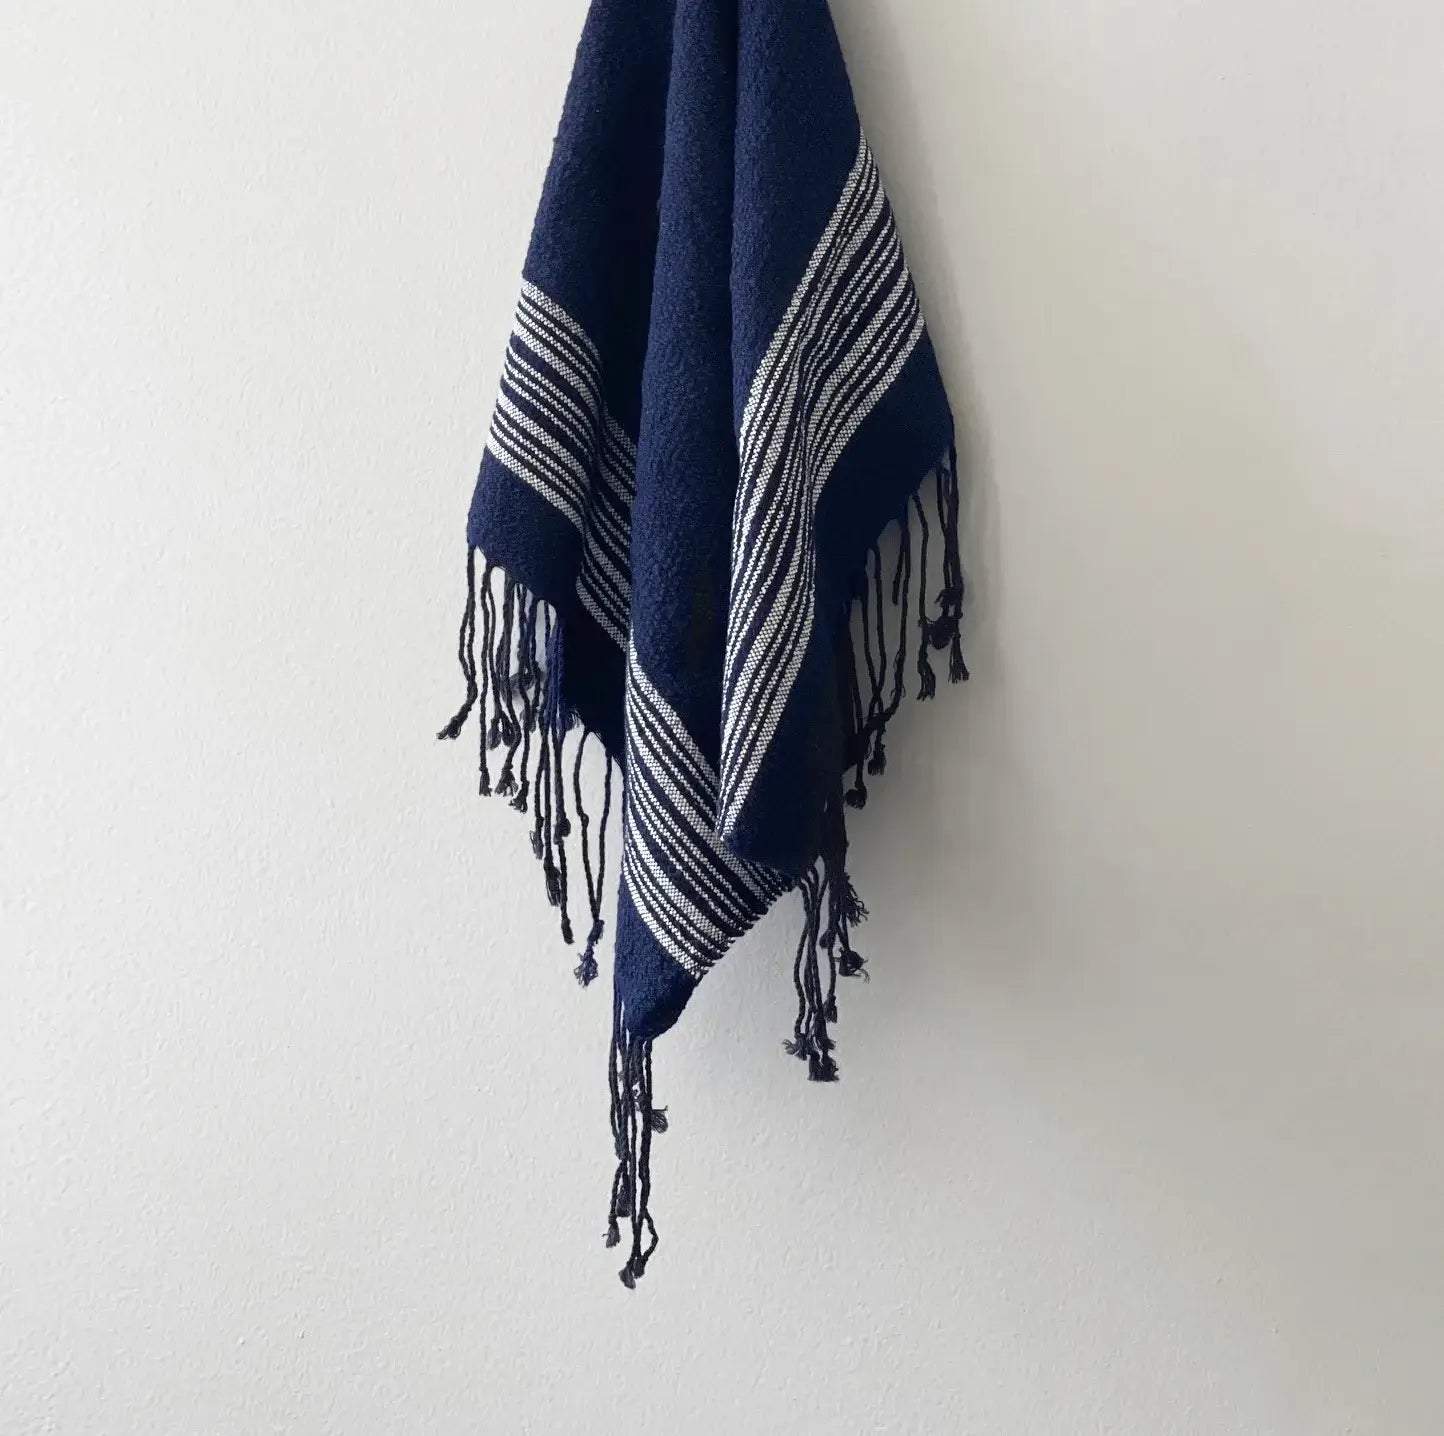 Dounia home Hand towel in Midnight blue made of Cotton, Model: Ziri